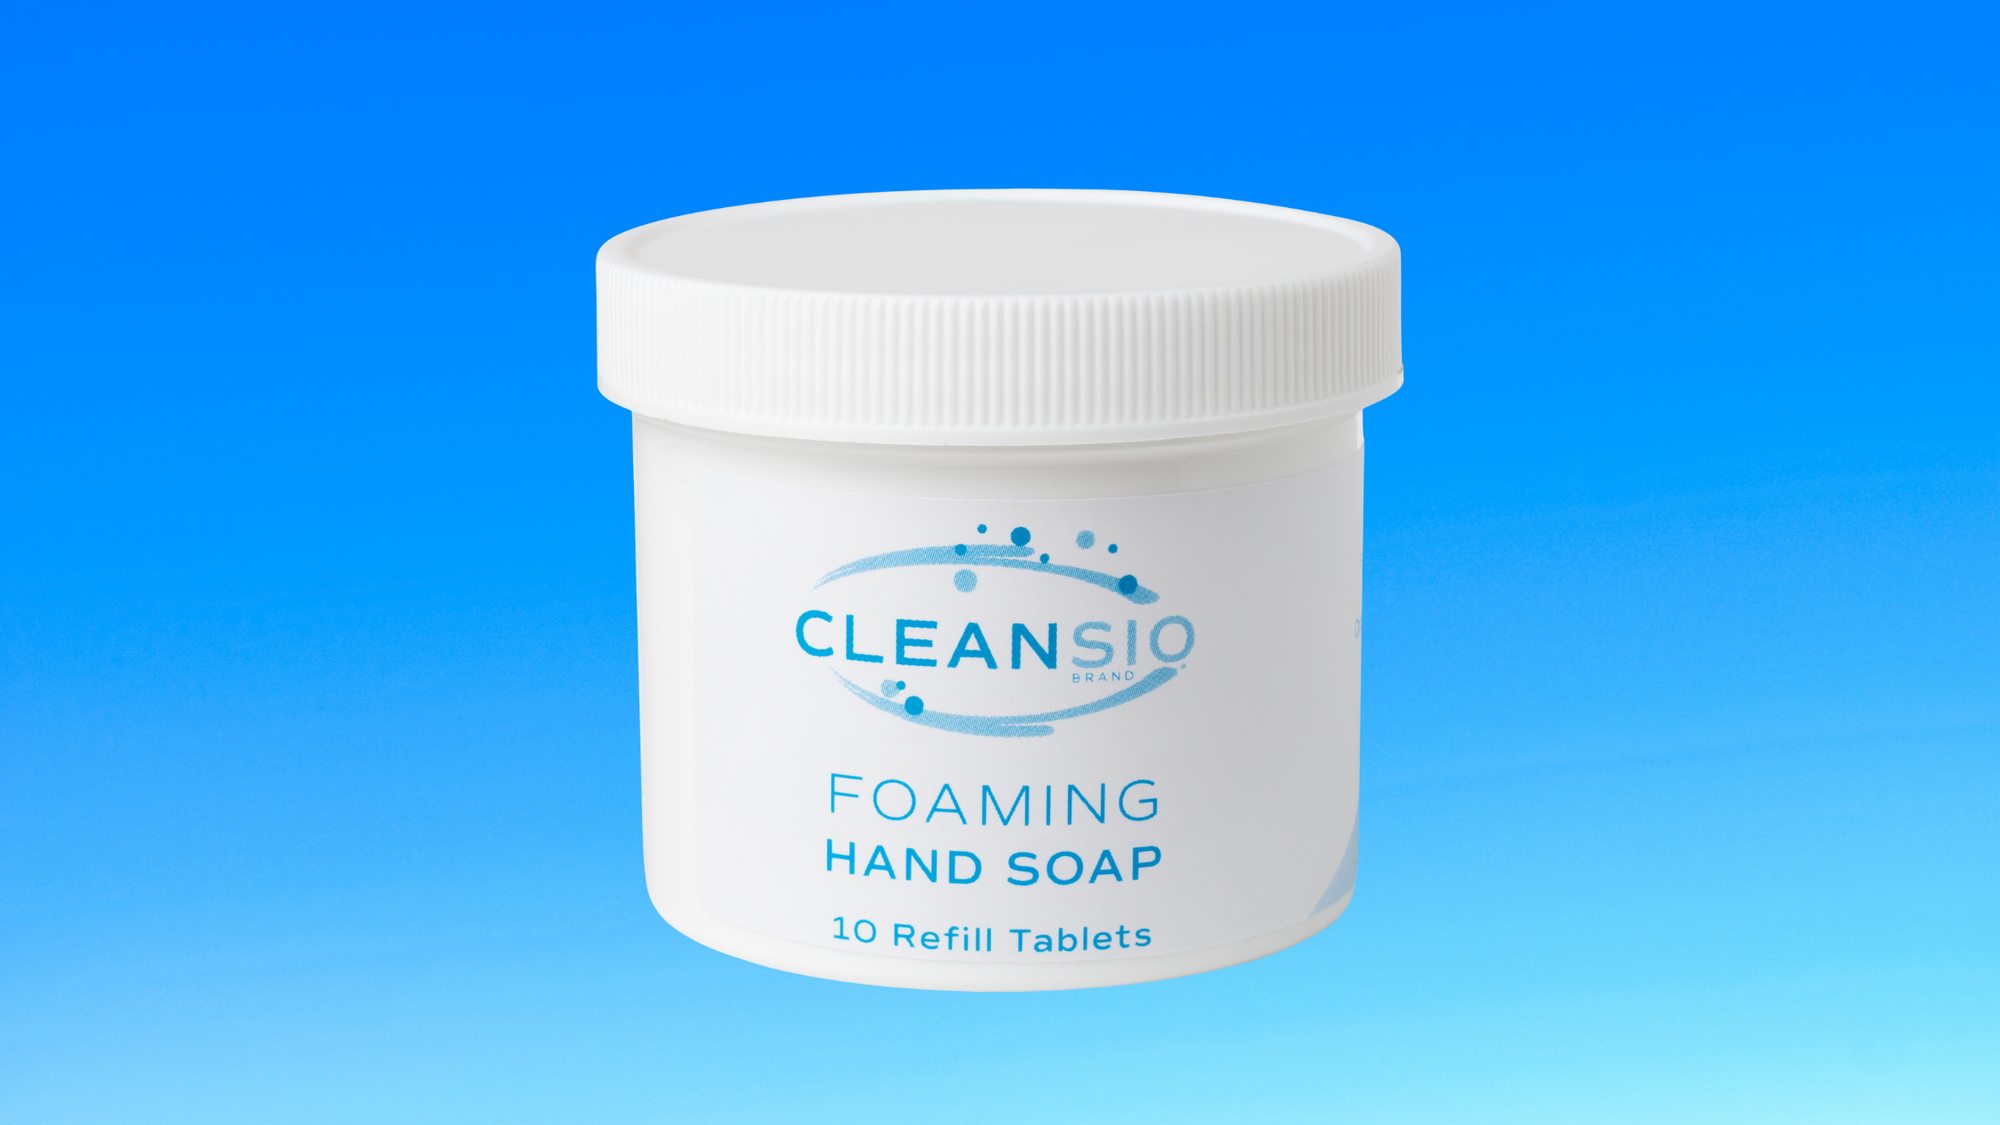 The How To's of Cleansio's Foaming Hand Soap Tablets